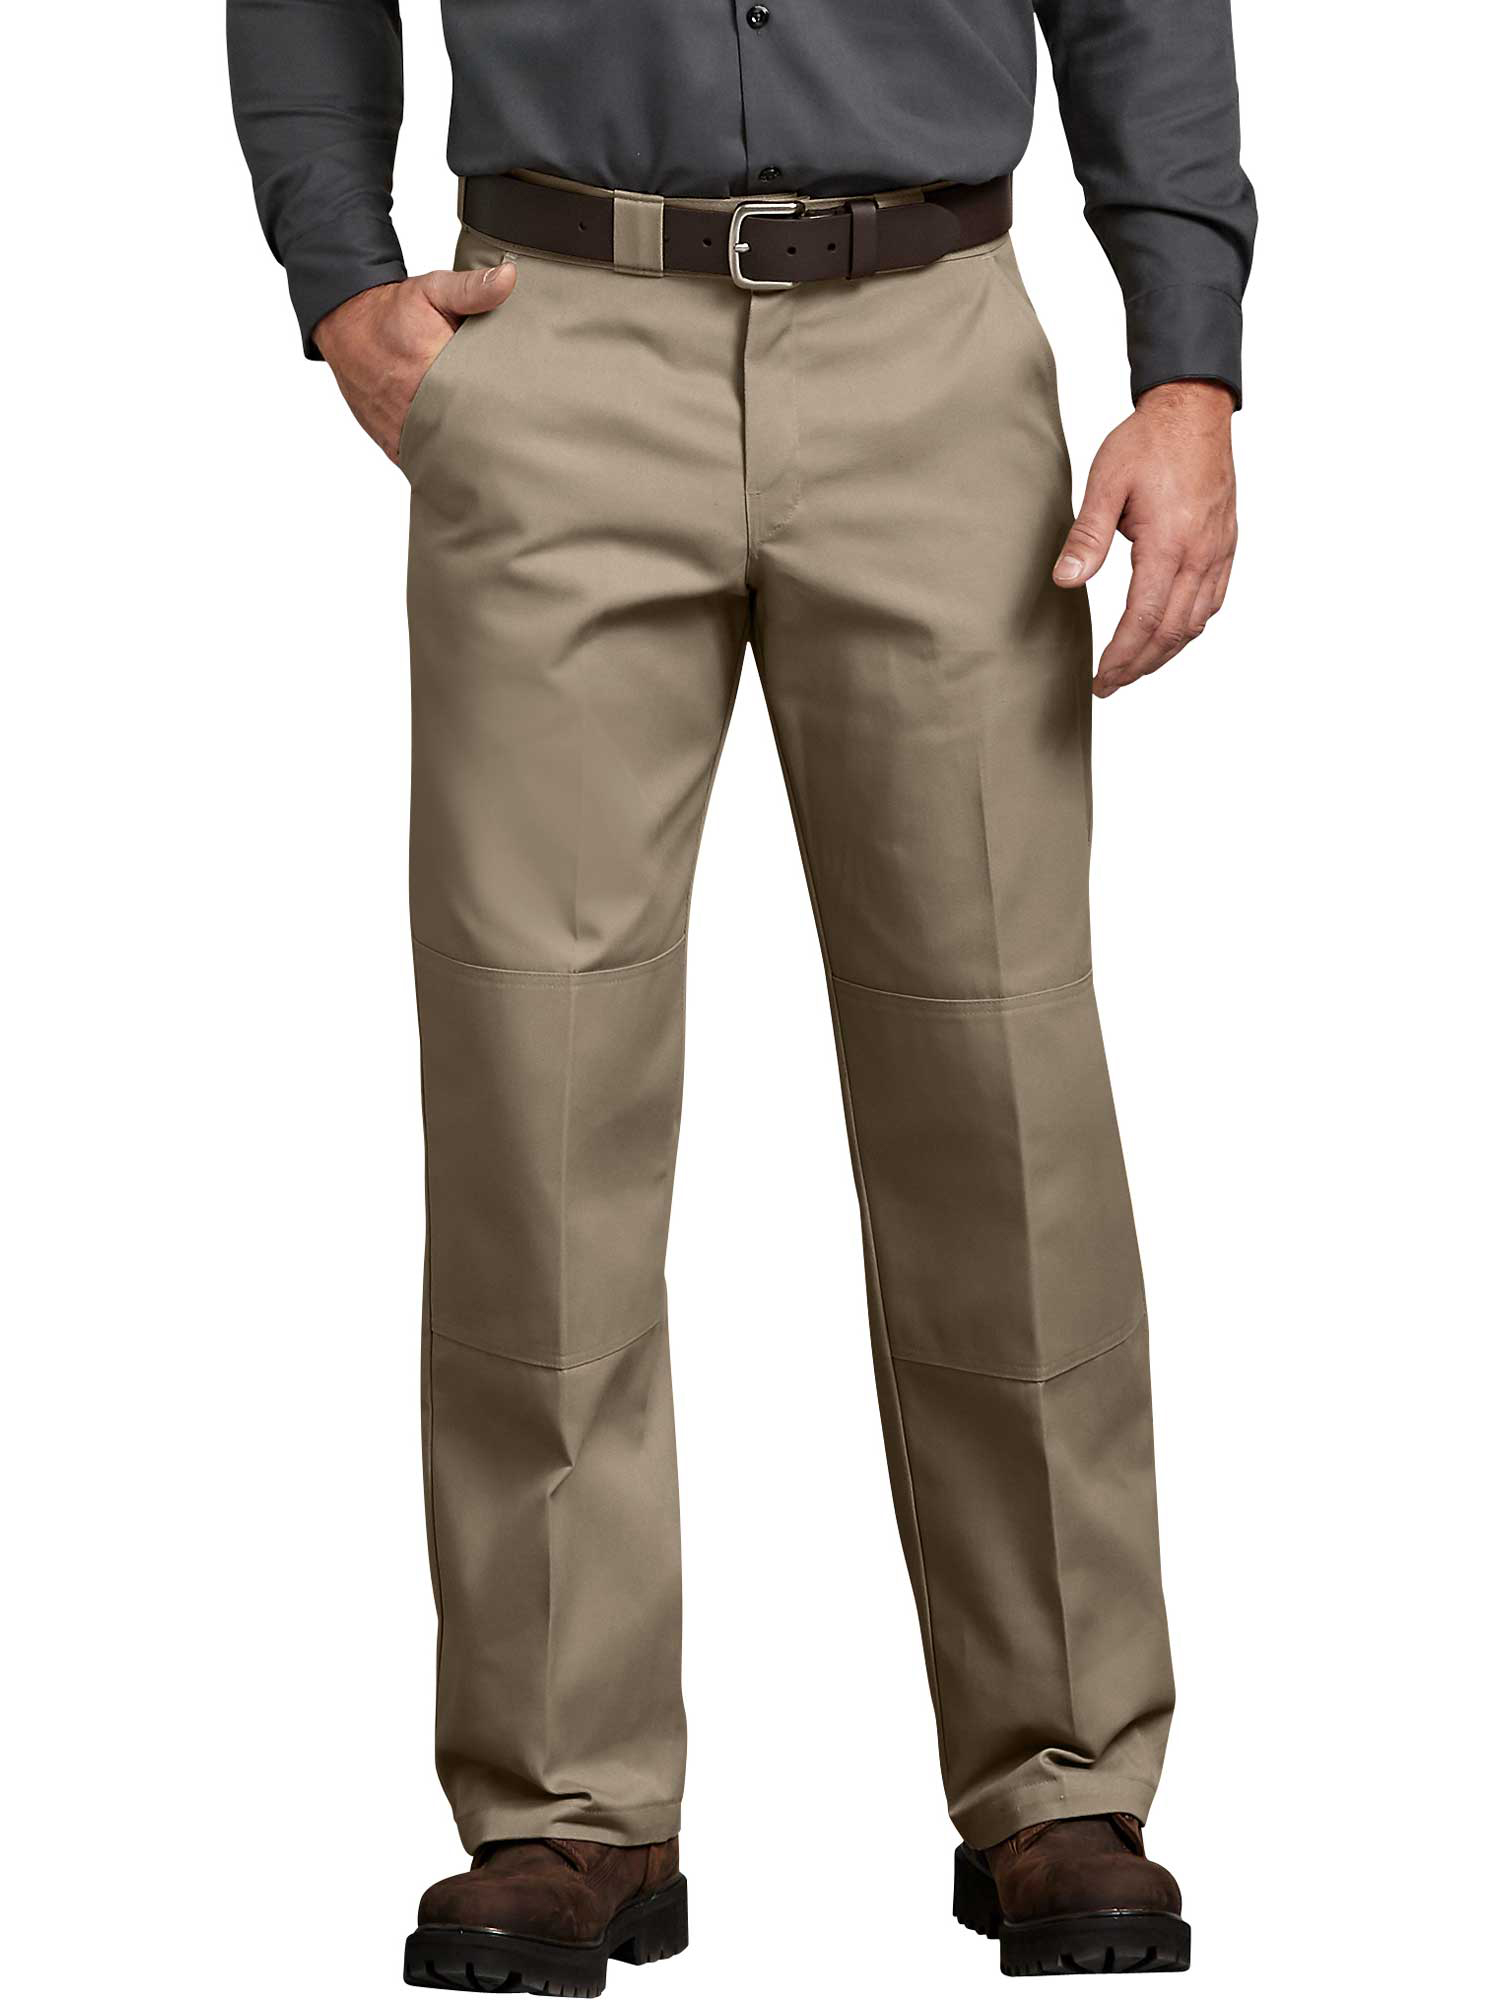 Dickies Mens Relaxed Fit Straight Leg Double Knee Pants - image 1 of 3